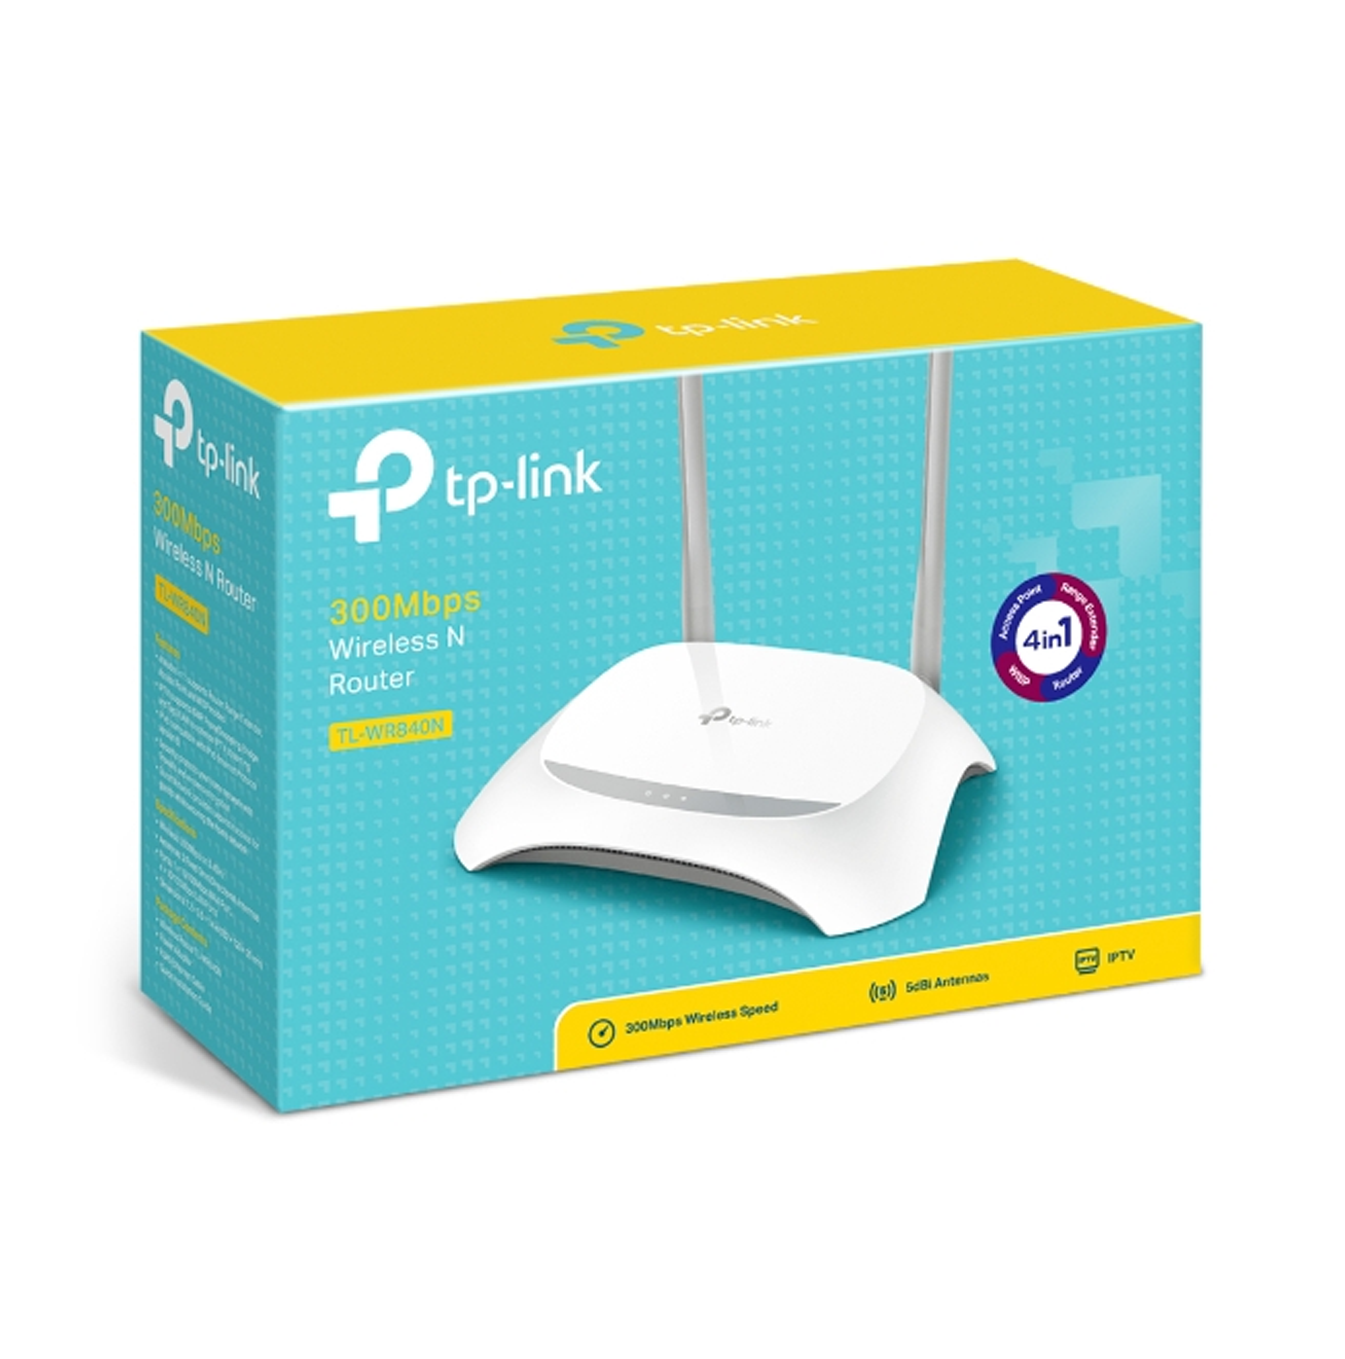 Router inalámbrica 300MBPS TL-WR840N Marca: TP-Link